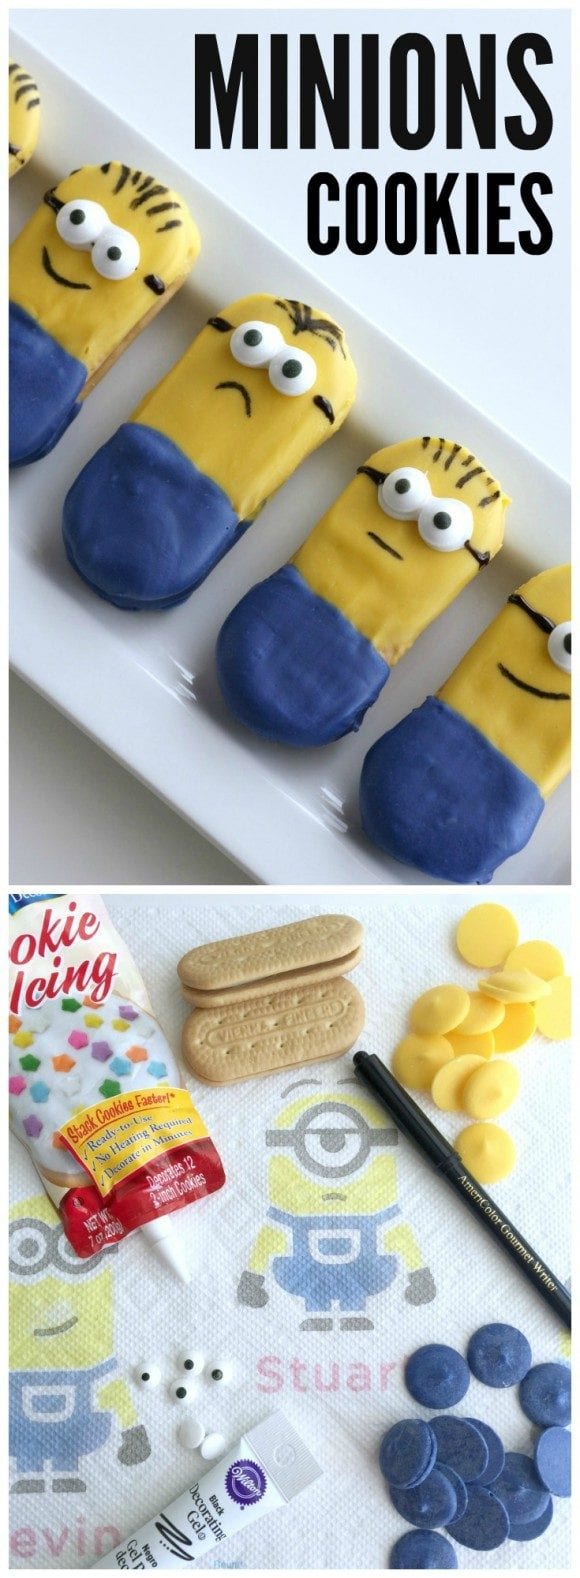 How to make Minions Cookies l CatchMyParty.com